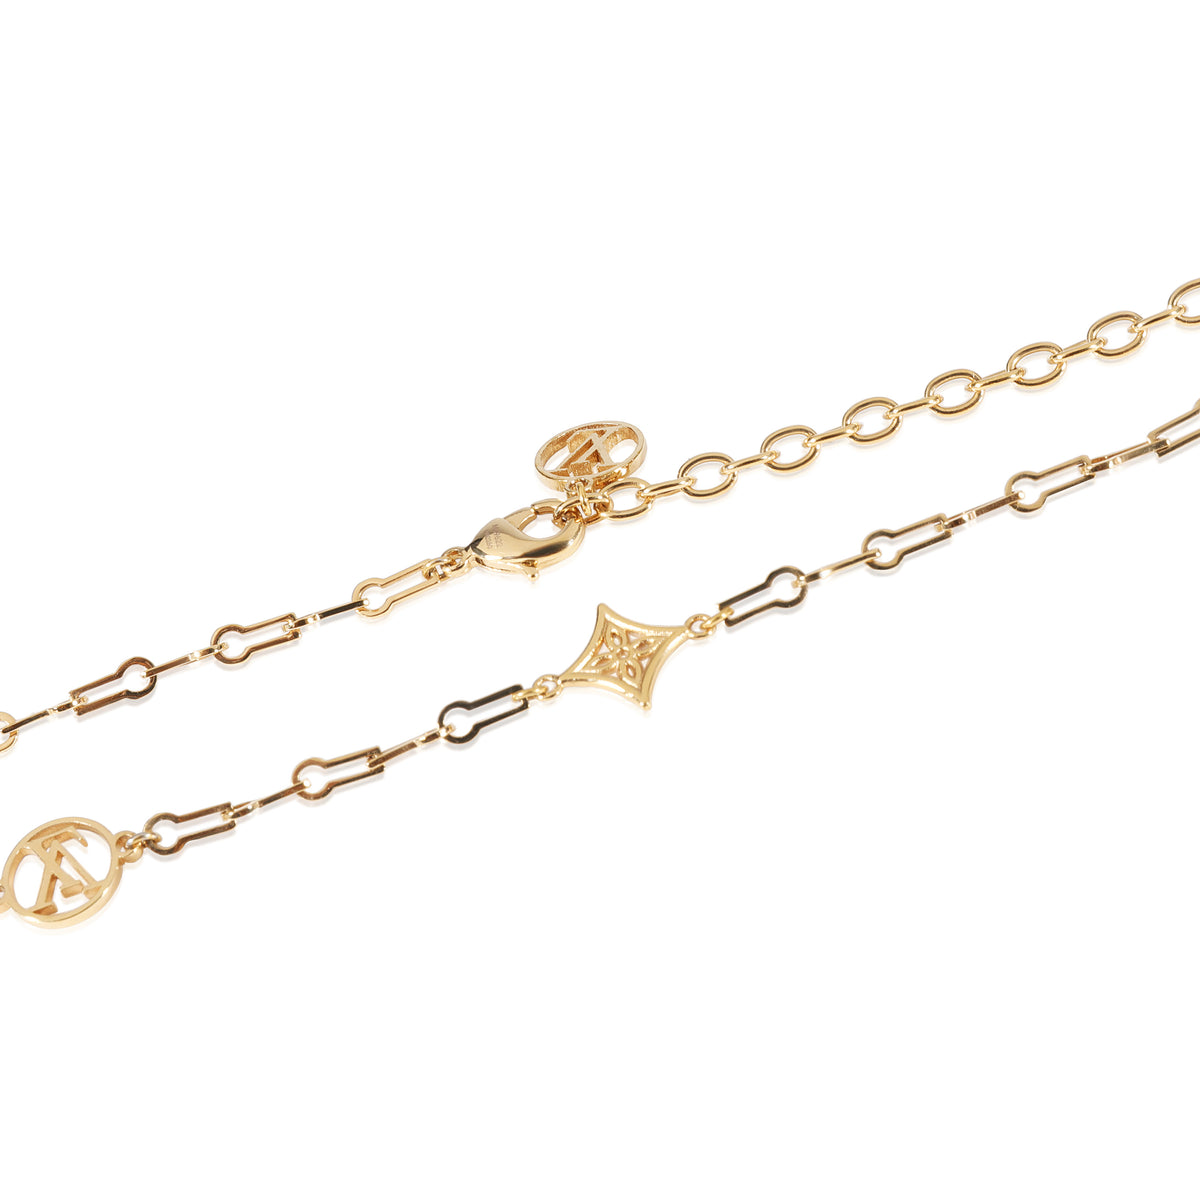 Shop Louis Vuitton MONOGRAM Forever young choker (M69622) by RayPearl